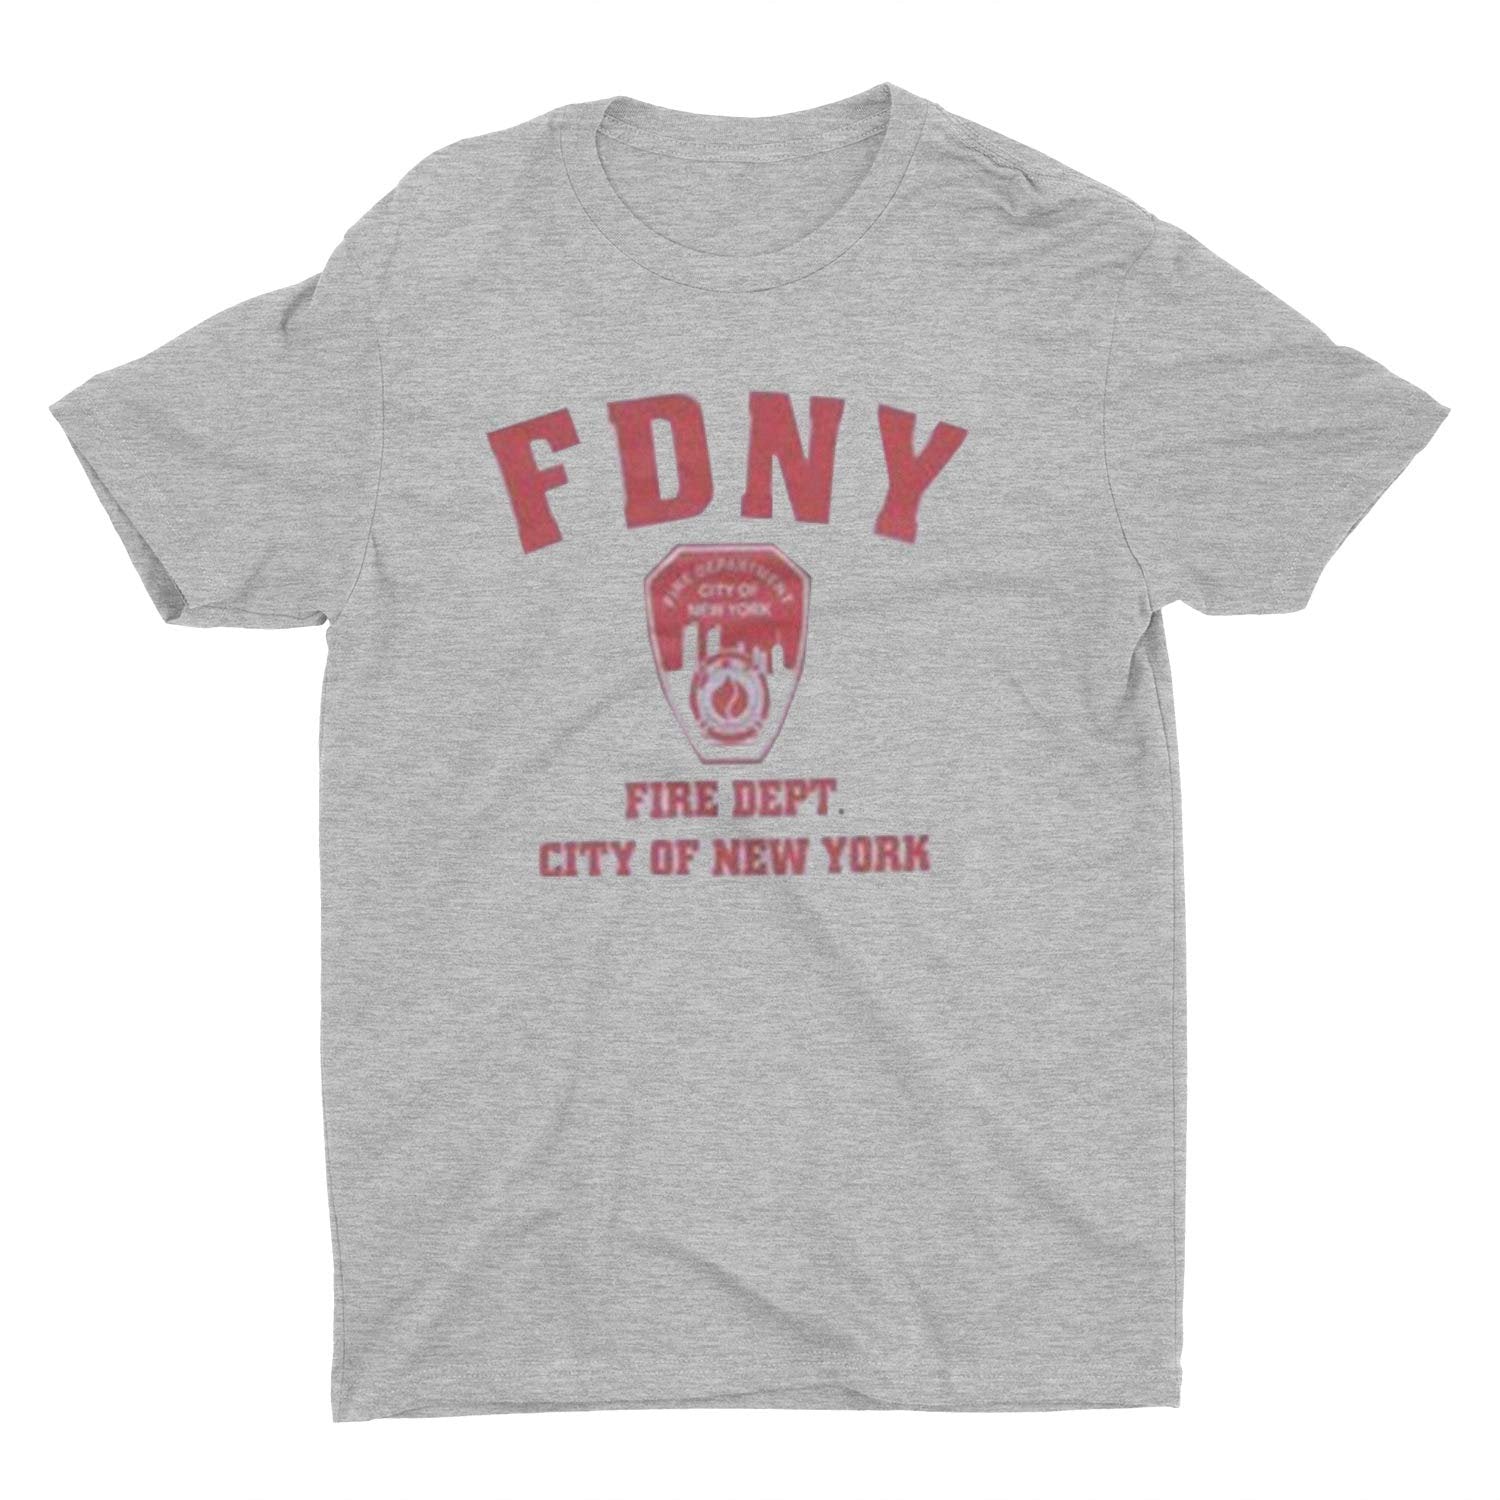 FDNY Short Sleeve Red Fire Dept Logo and Shield T-Shirt Gray